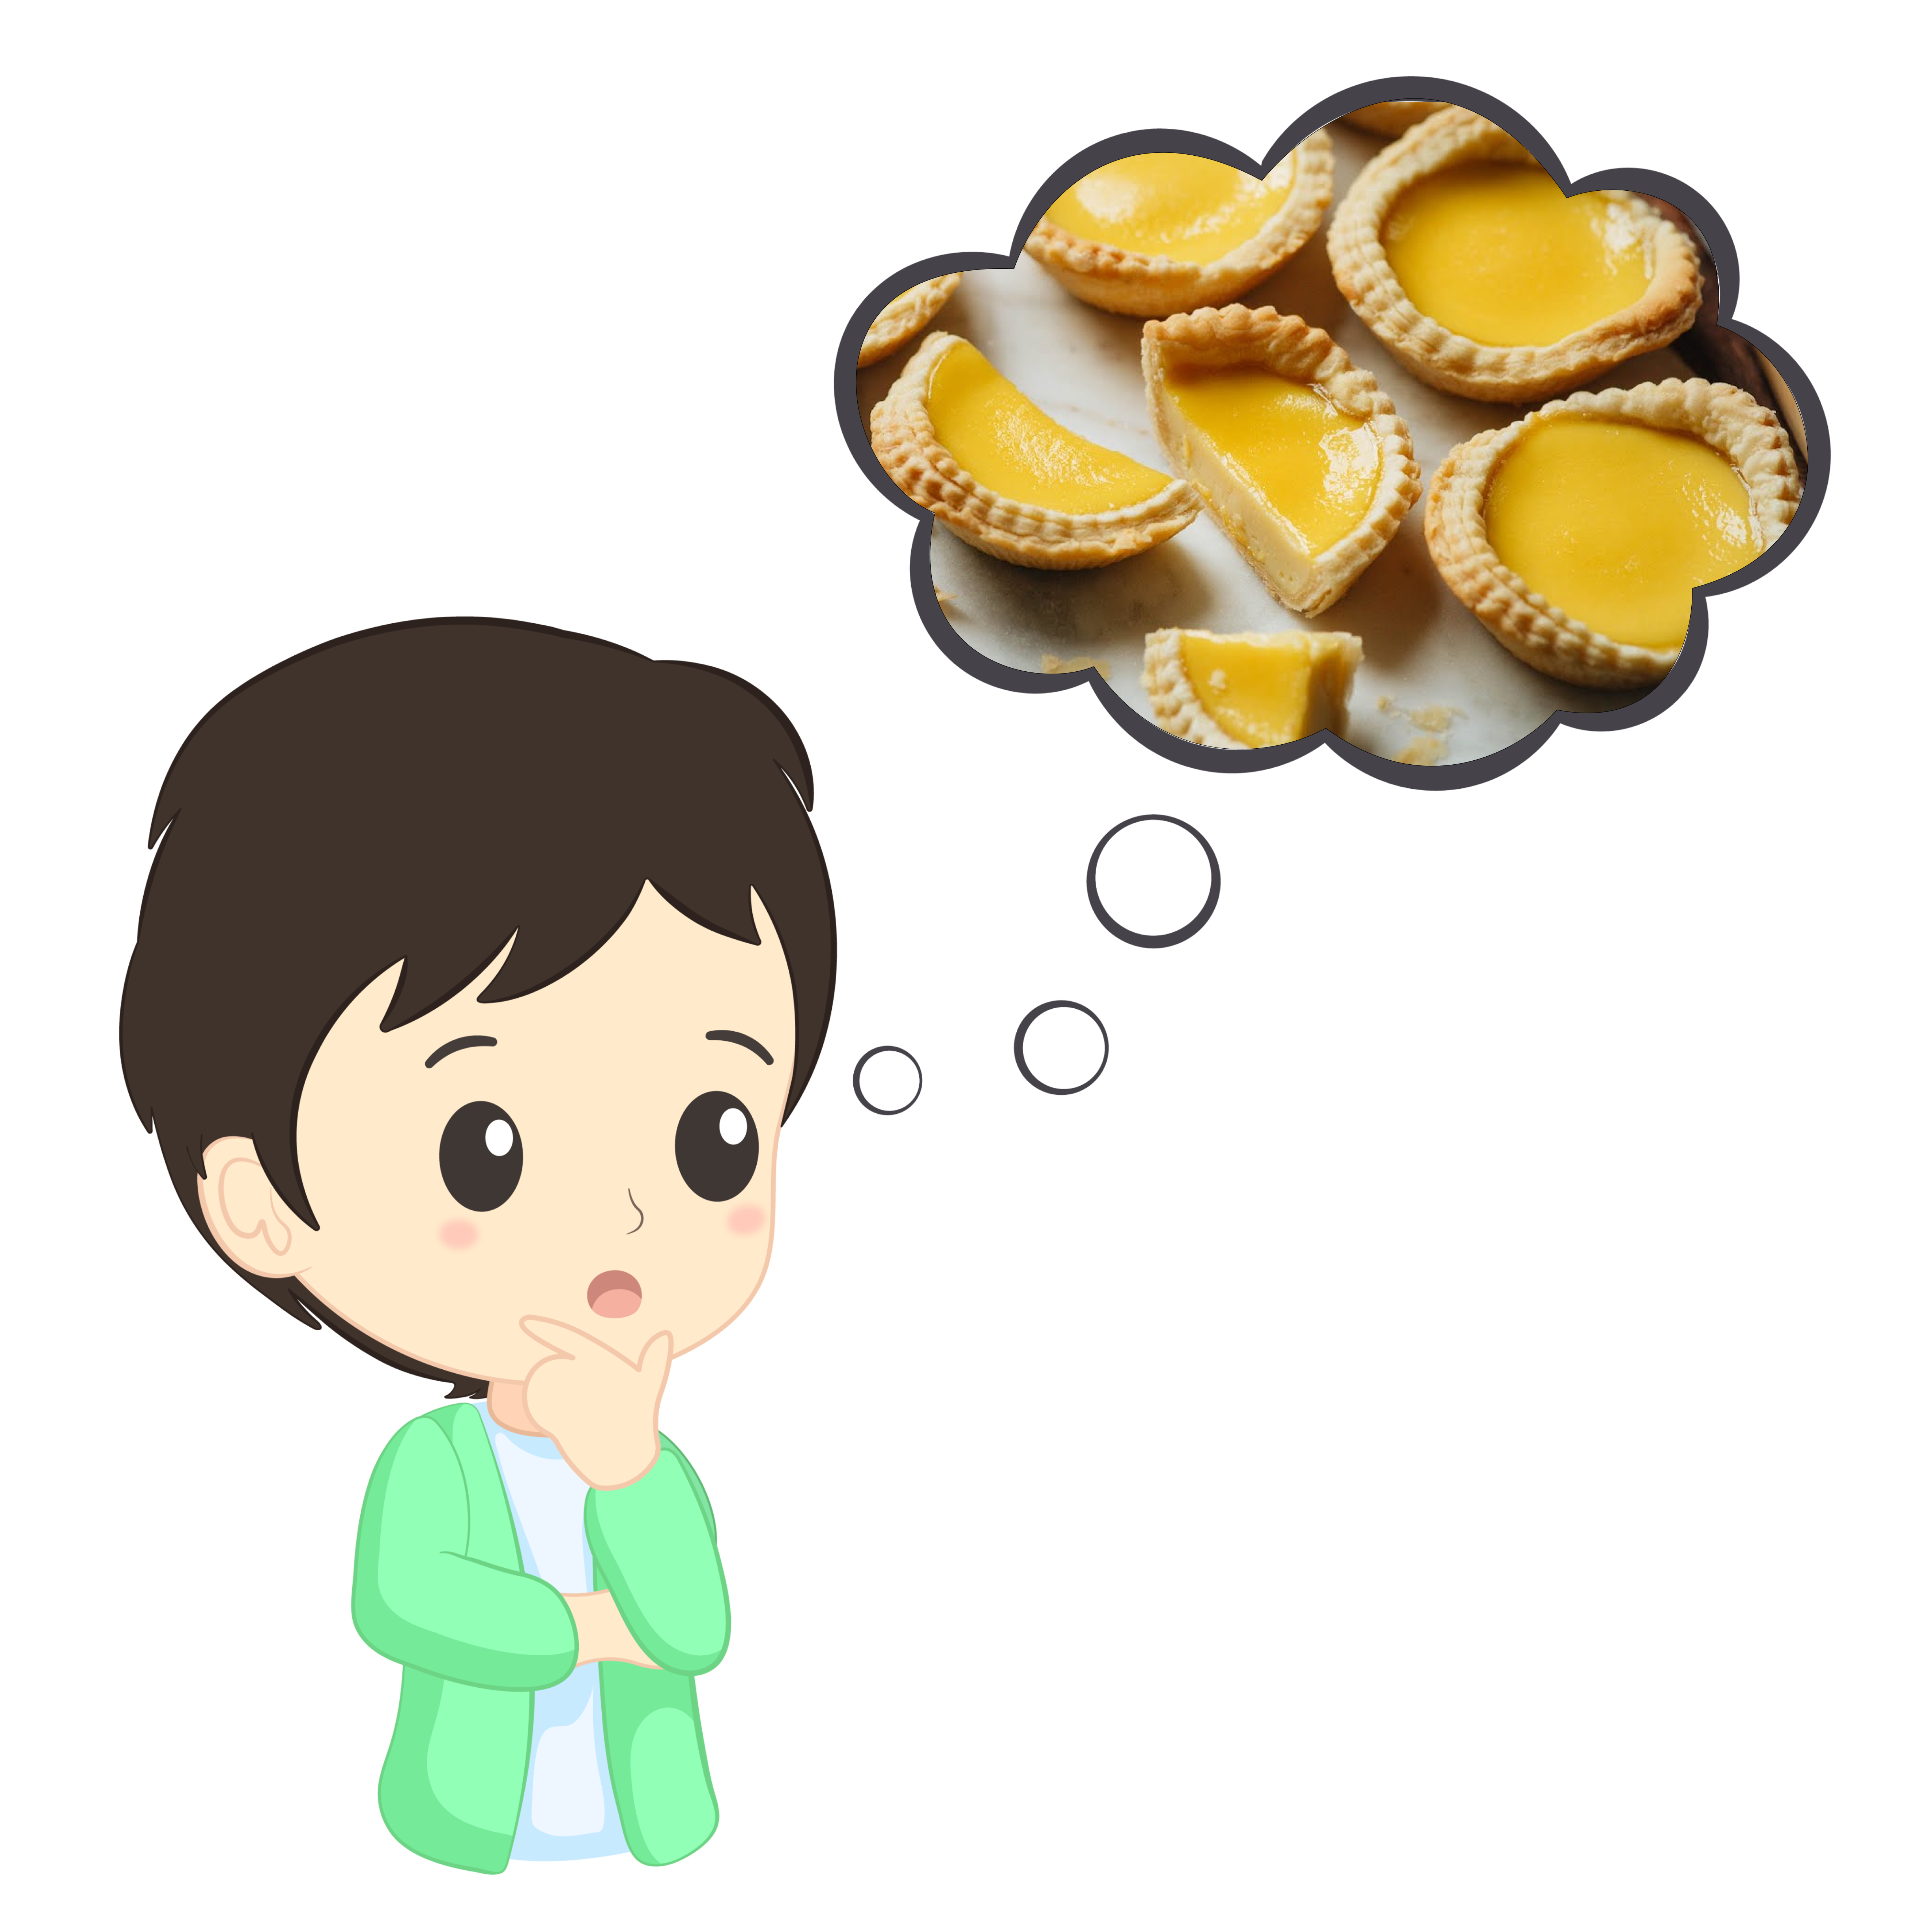 Person in thinking pose with a thought bubble overhead featuring an image of egg tarts